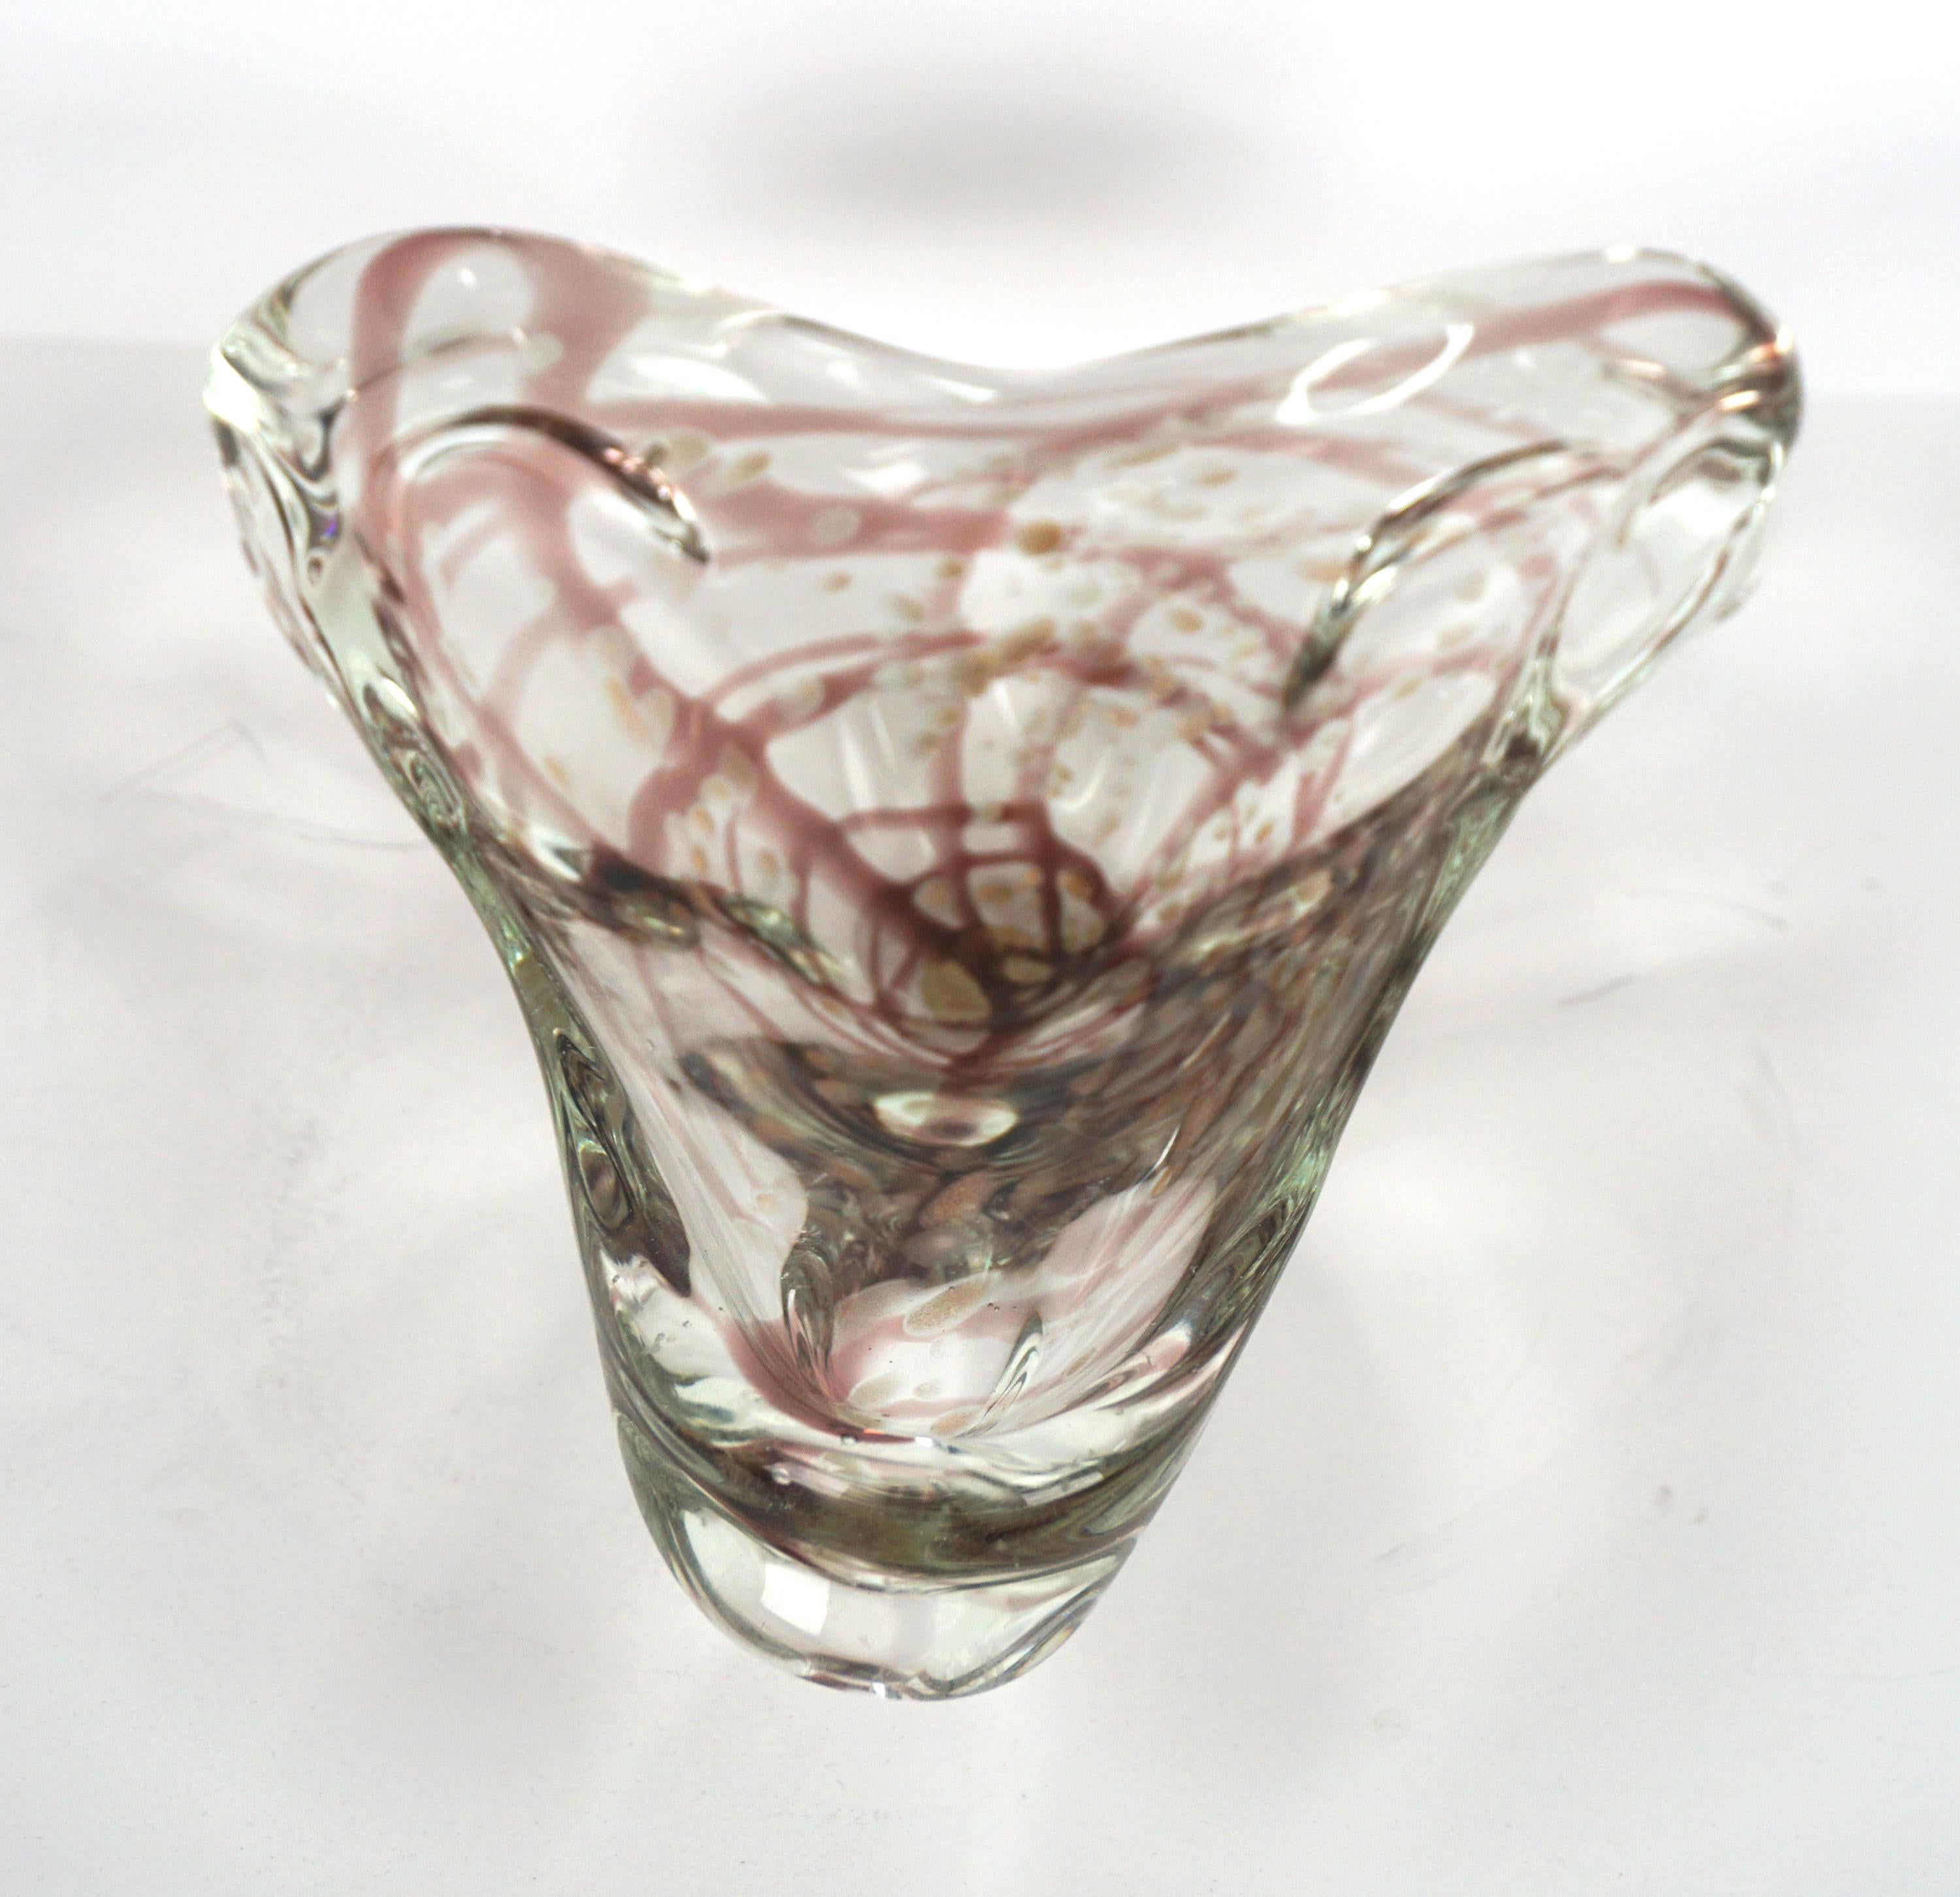 Beautiful clear centerpiece bowl / ashtray with copper aventurine and burgundy streaks in web design. Indistinct Murano label (signed). Size: 3